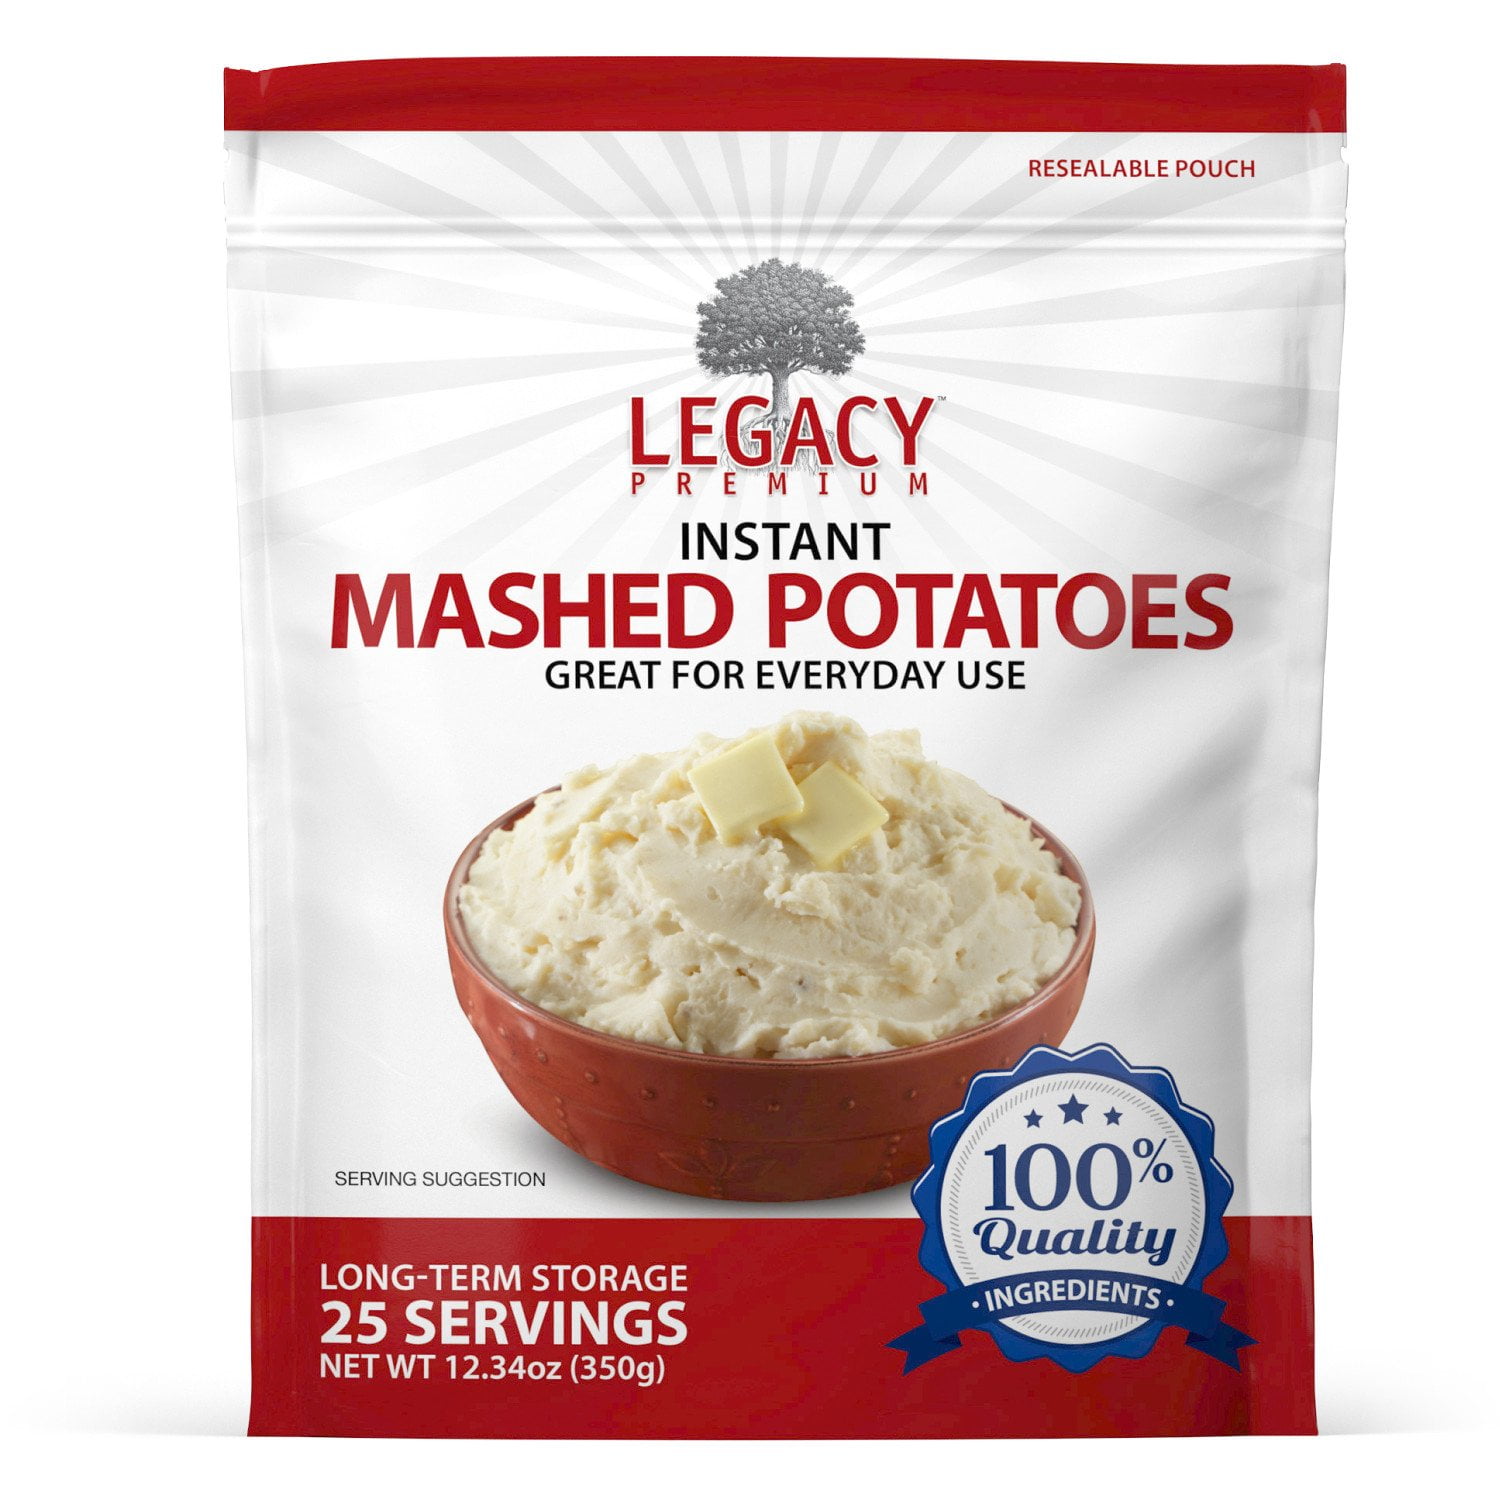 Legacy Premium Instant Mashed Potatoes Pouch Front